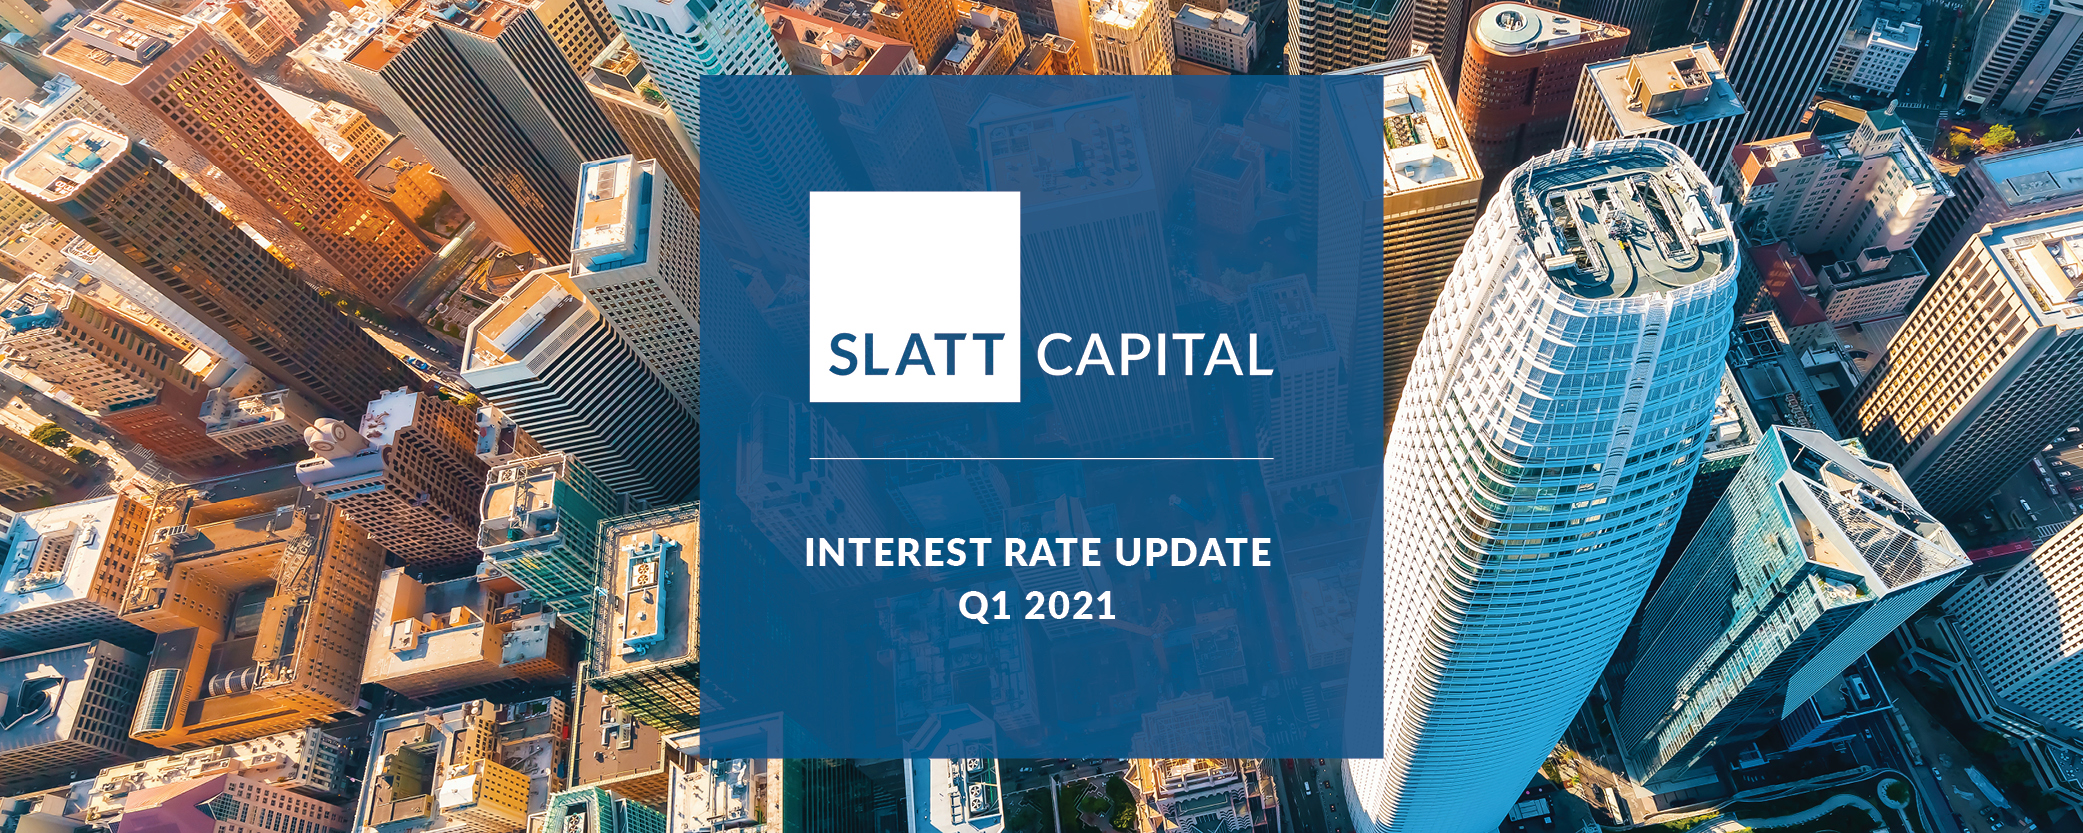 Our Mortgage bankers want to make sure you stay up to date which is why did a Interest Rate Update Q1 - 2021